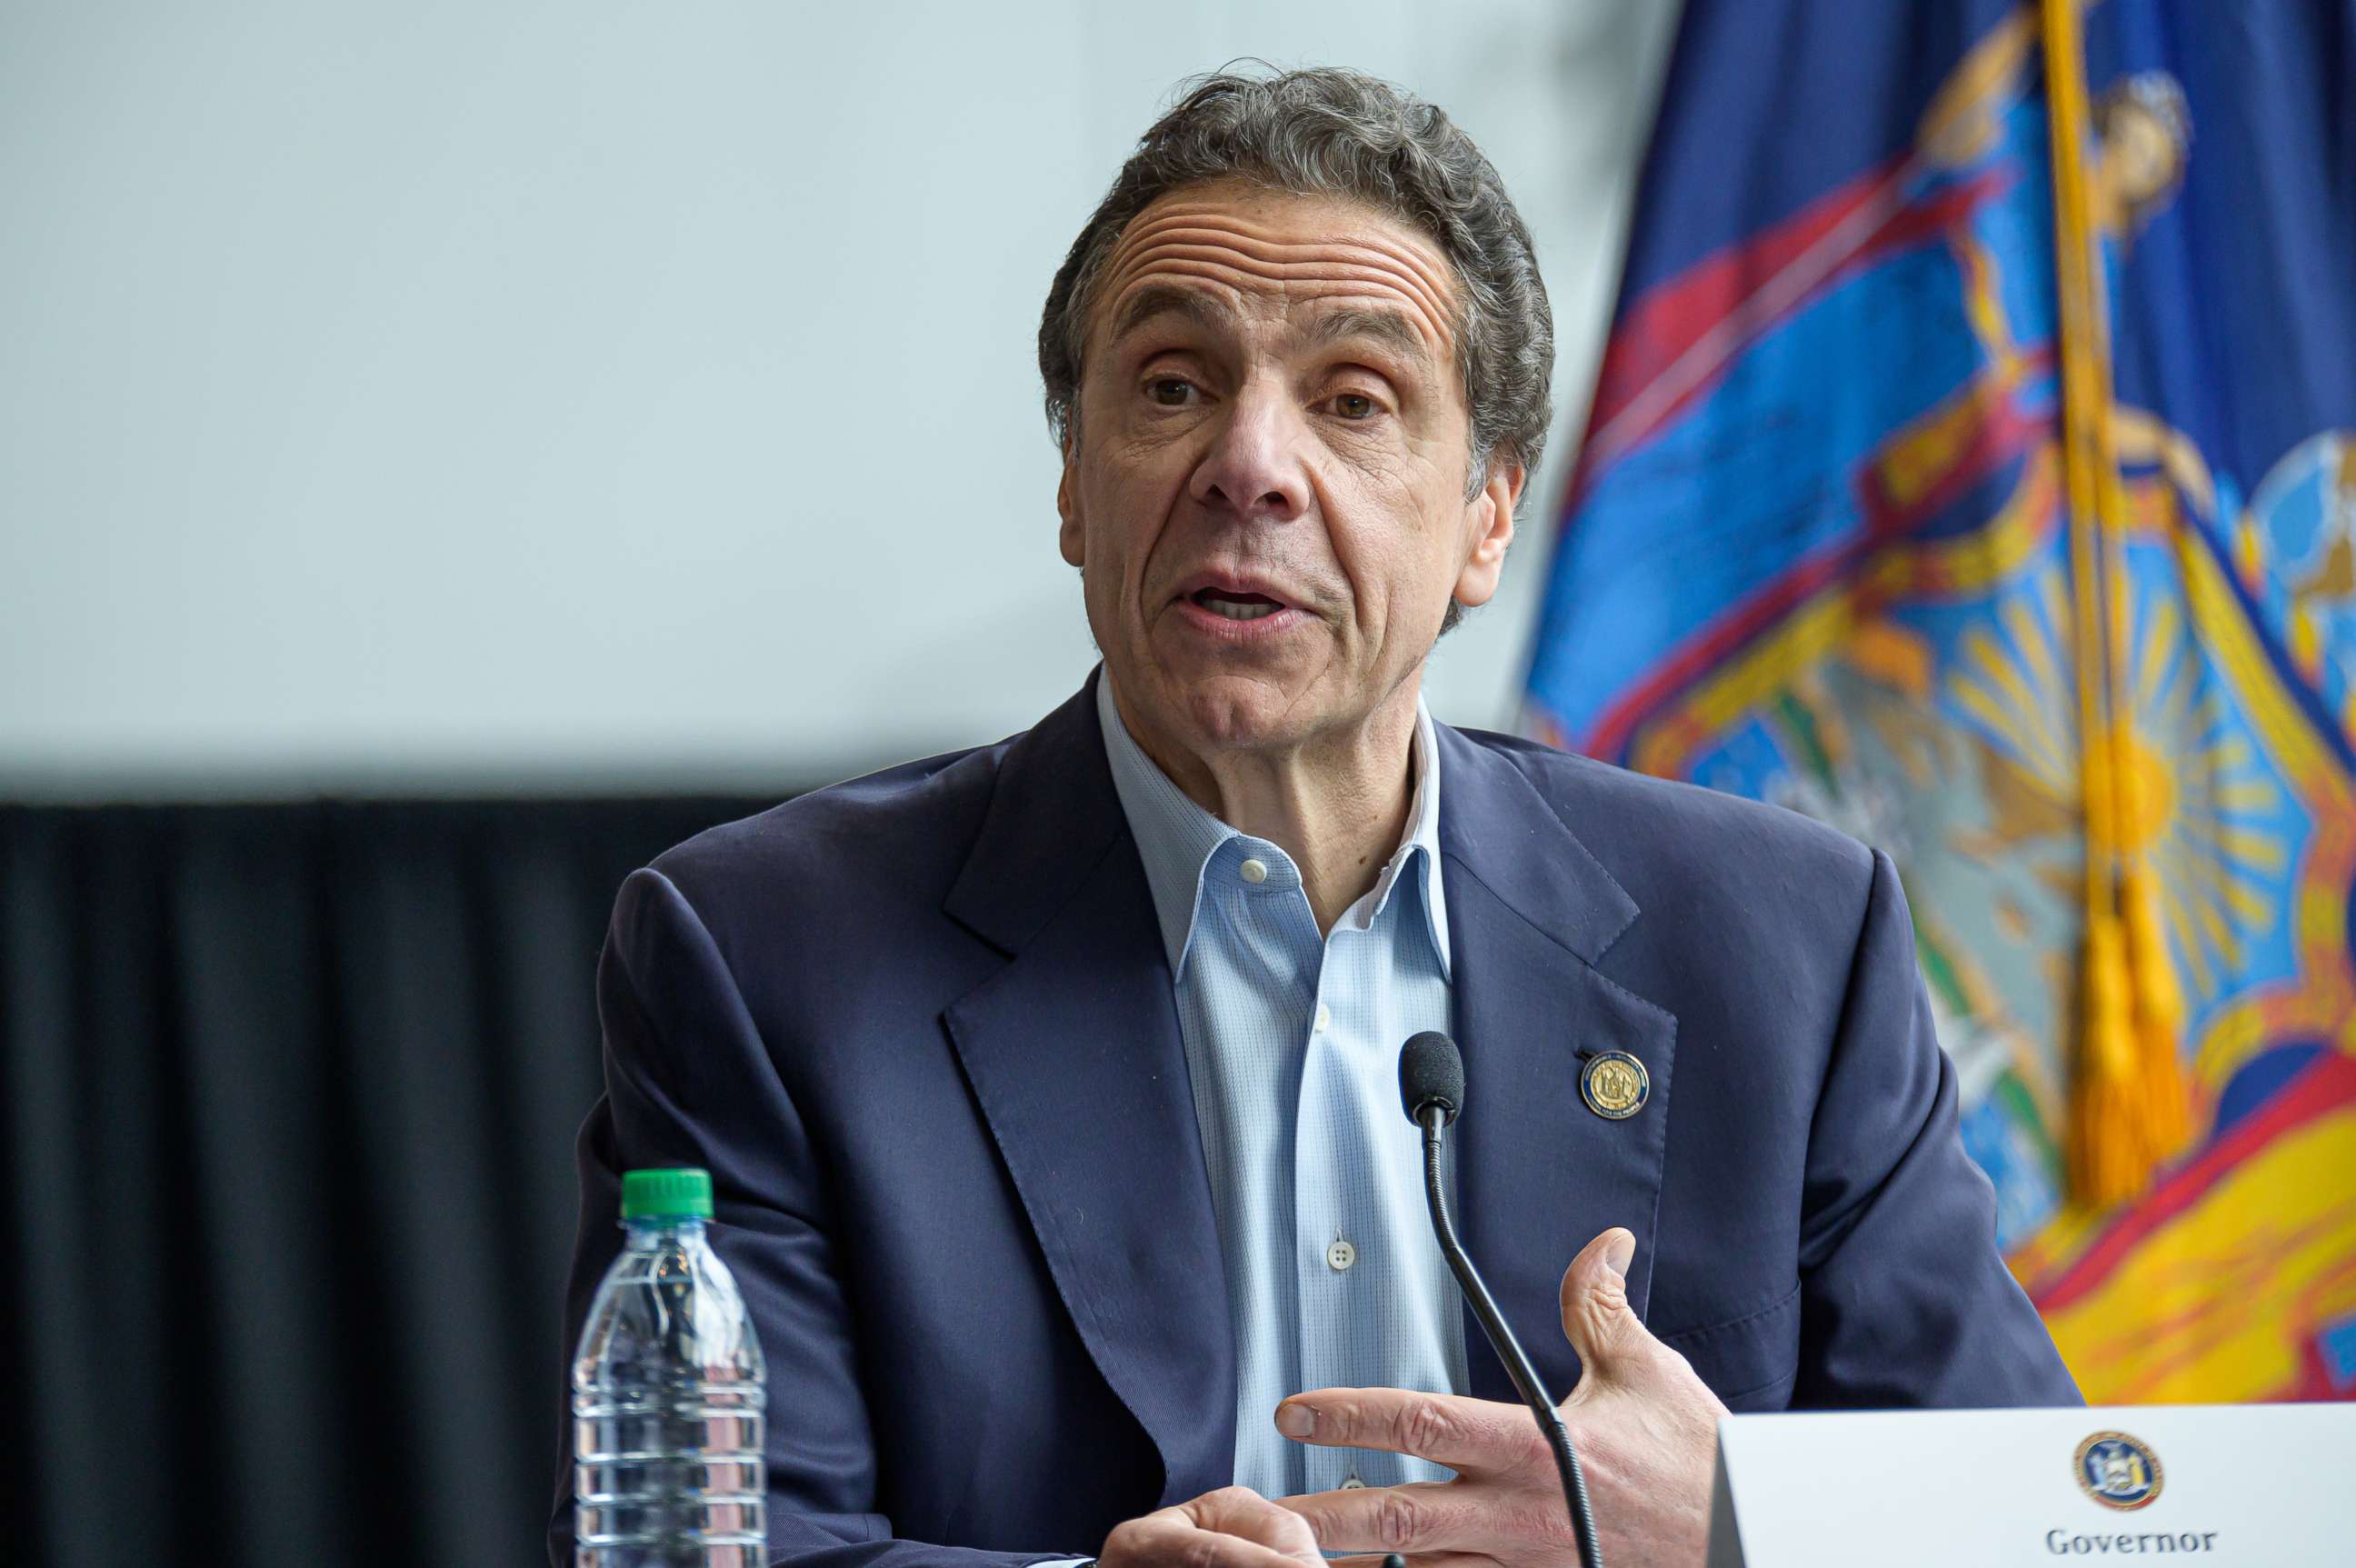 PHOTO: Governor Andrew Cuomo speaks during a press conference at the field hospital site at the Javits Center, March 30, 2020, in New York City.